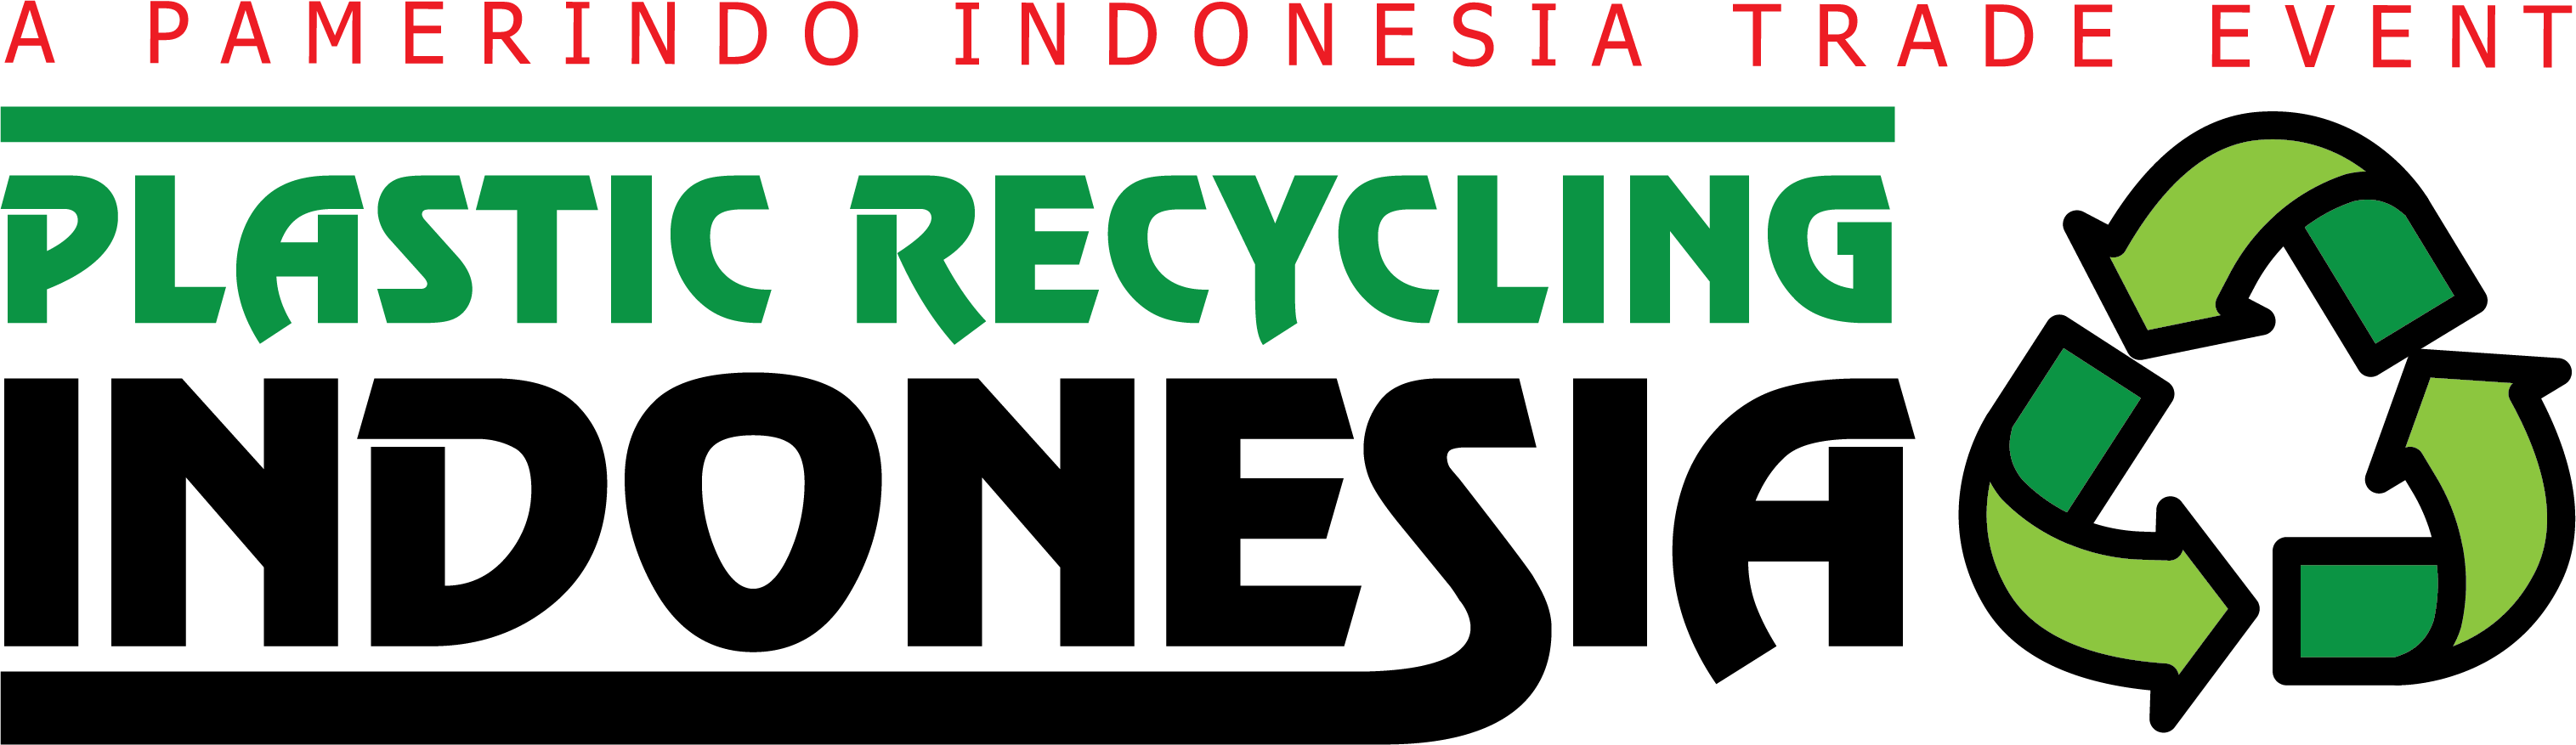 Plastic Recycling Indonesia